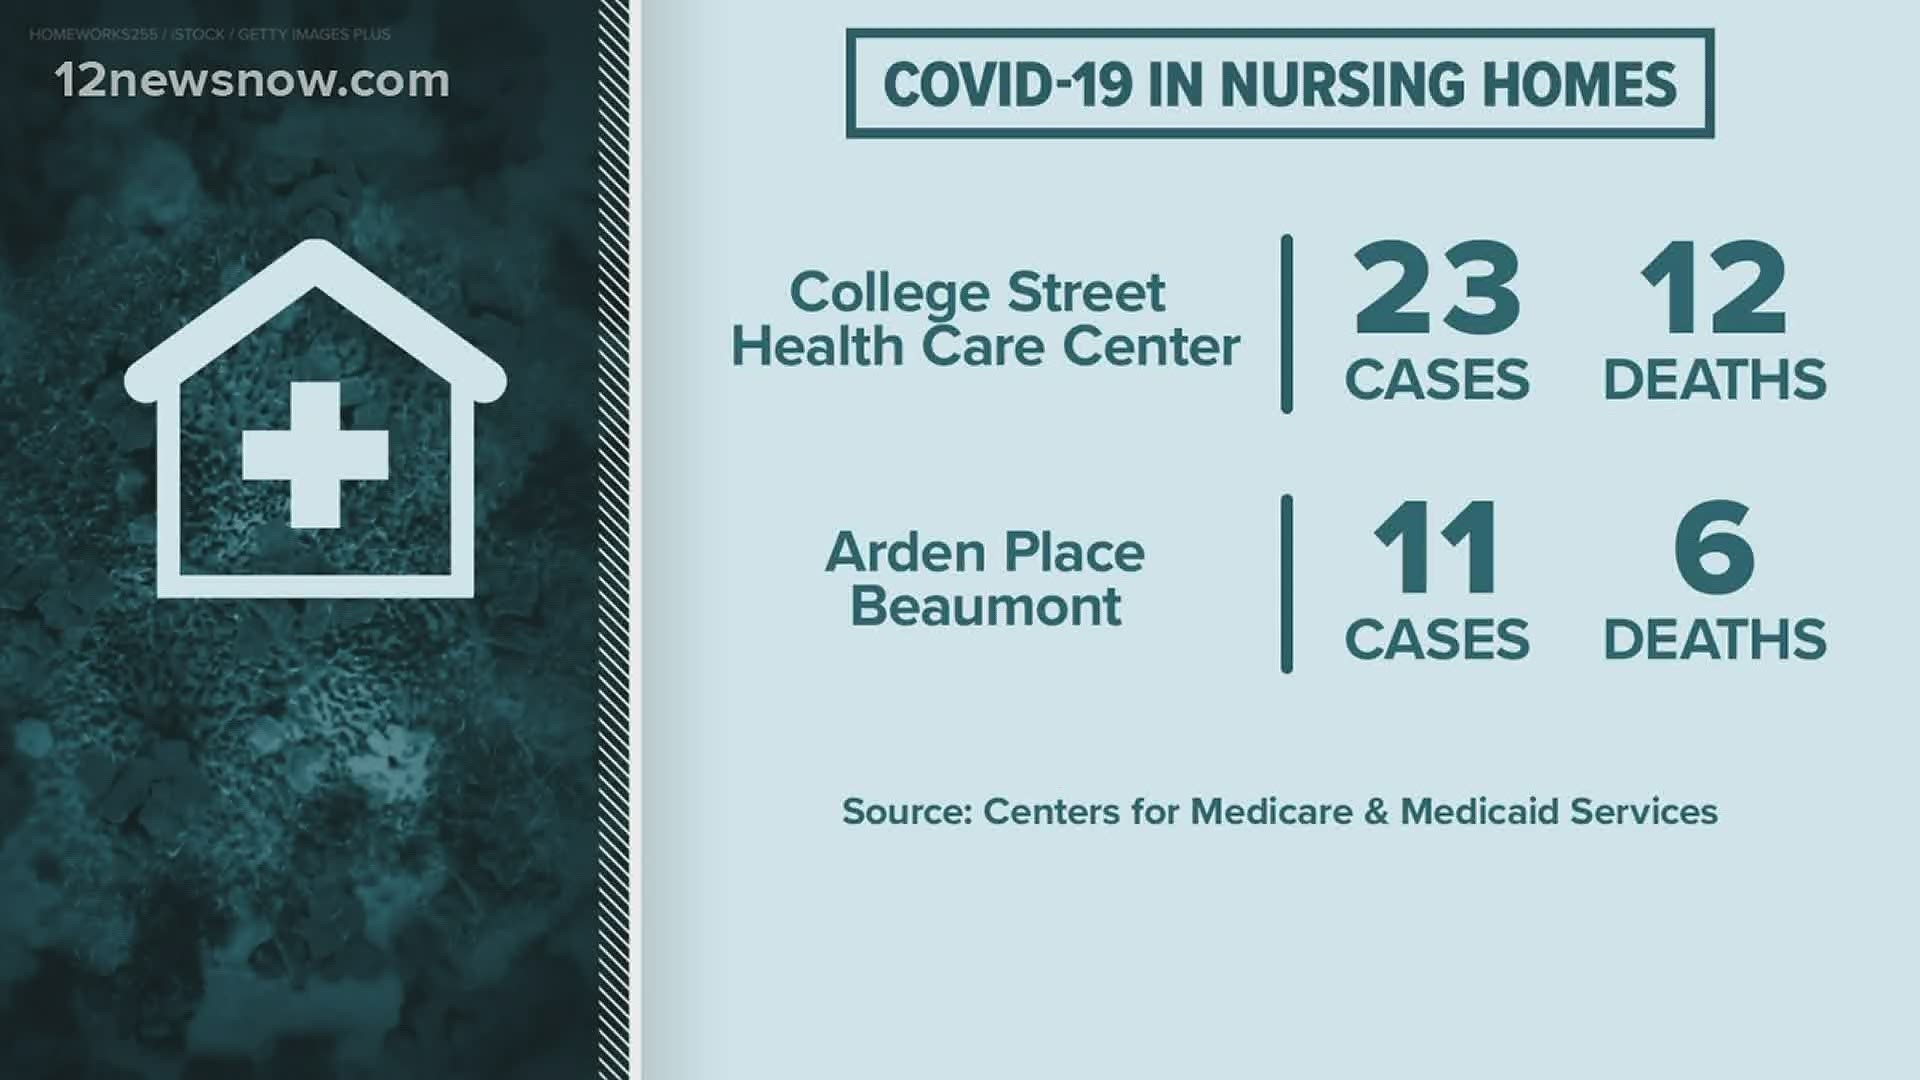 Nursing home facilities are supposed to self report COVID-19 cases, according to the state.